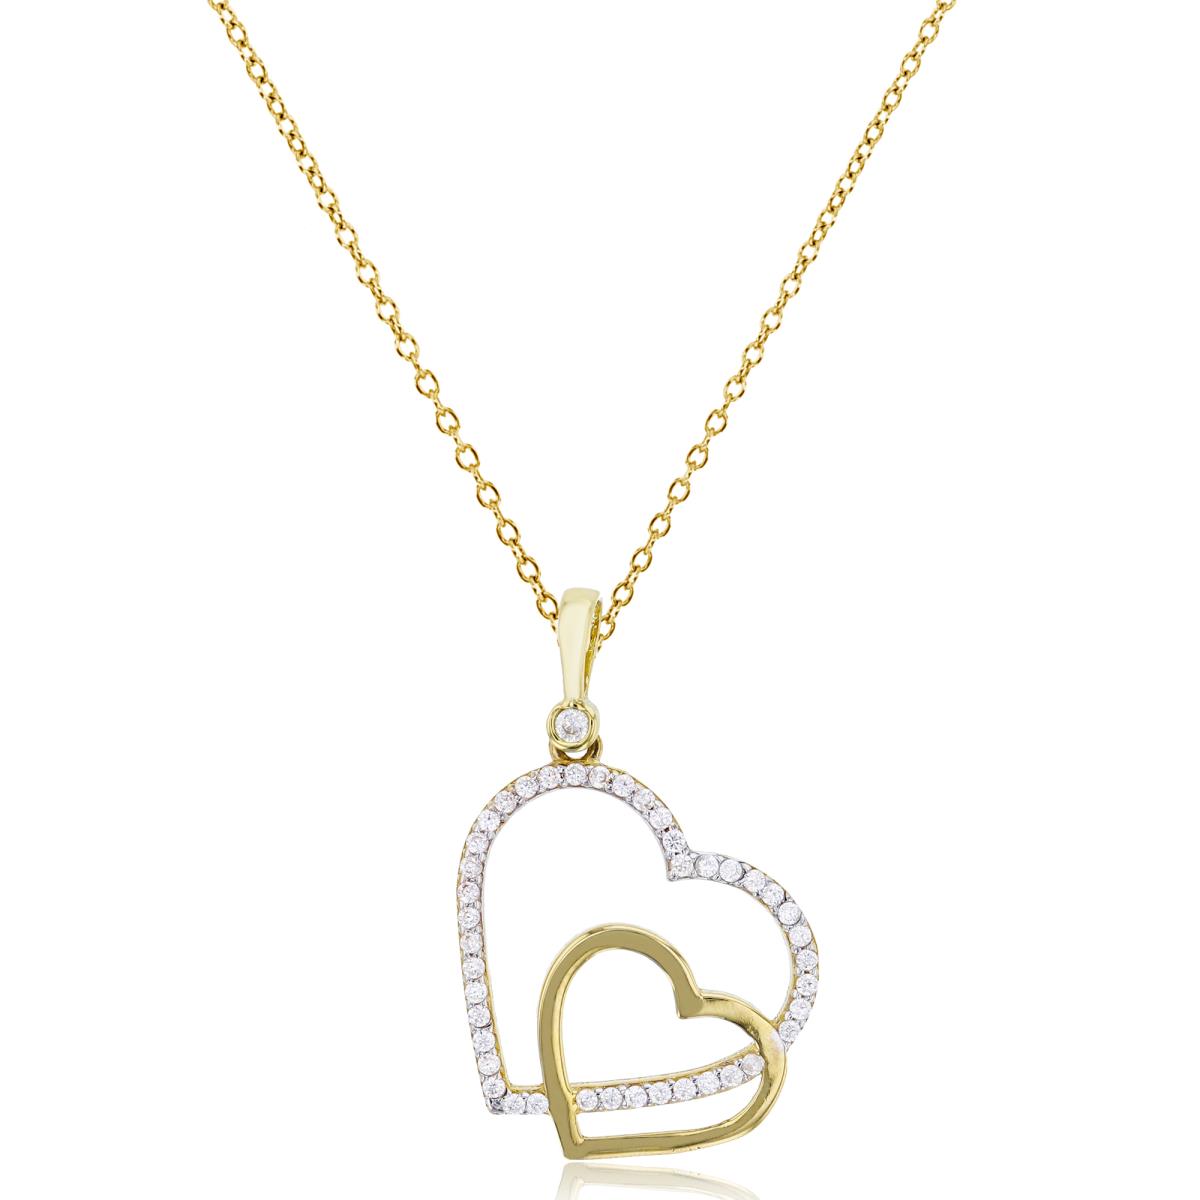 10K Yellow Gold Micropave & Polished Double Open Hearts 18" Necklace